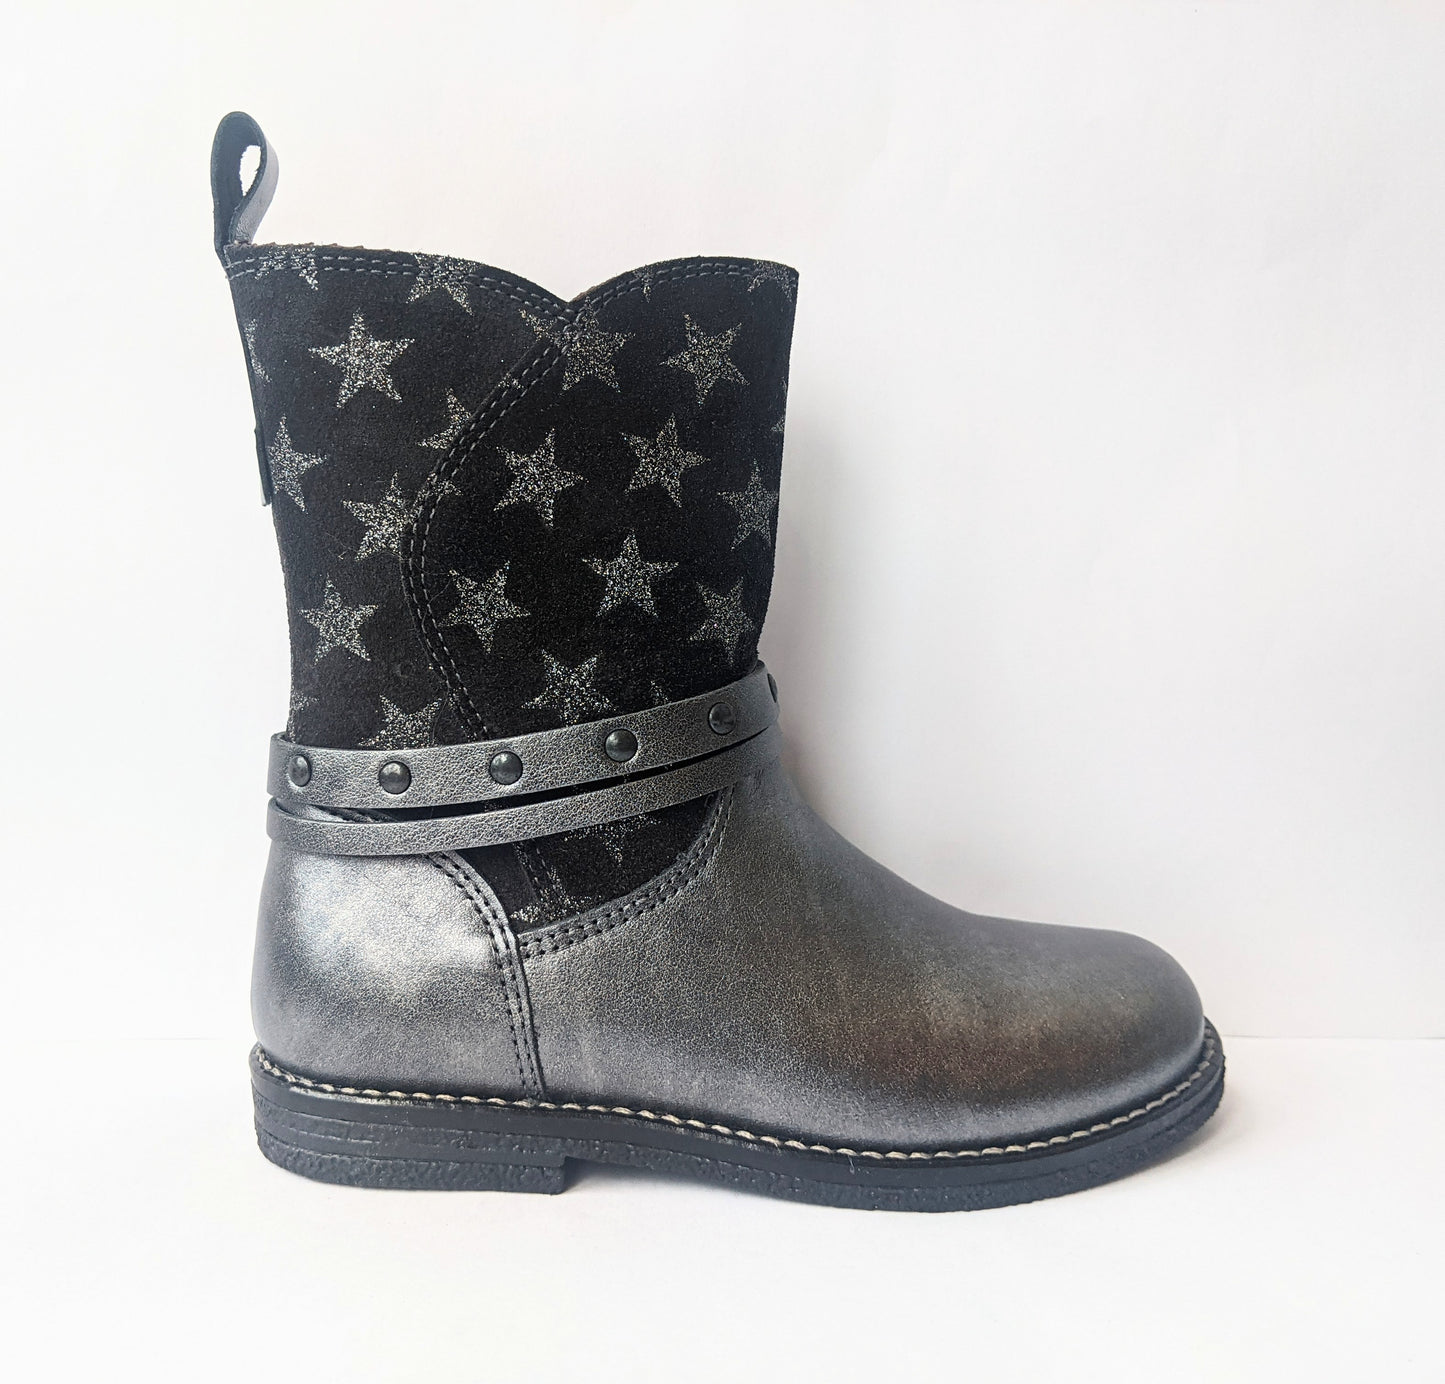 A girls calf boot by Froddo, style G3160085-2,in silver leather and star print nubuck with zip fastening. Right side view.